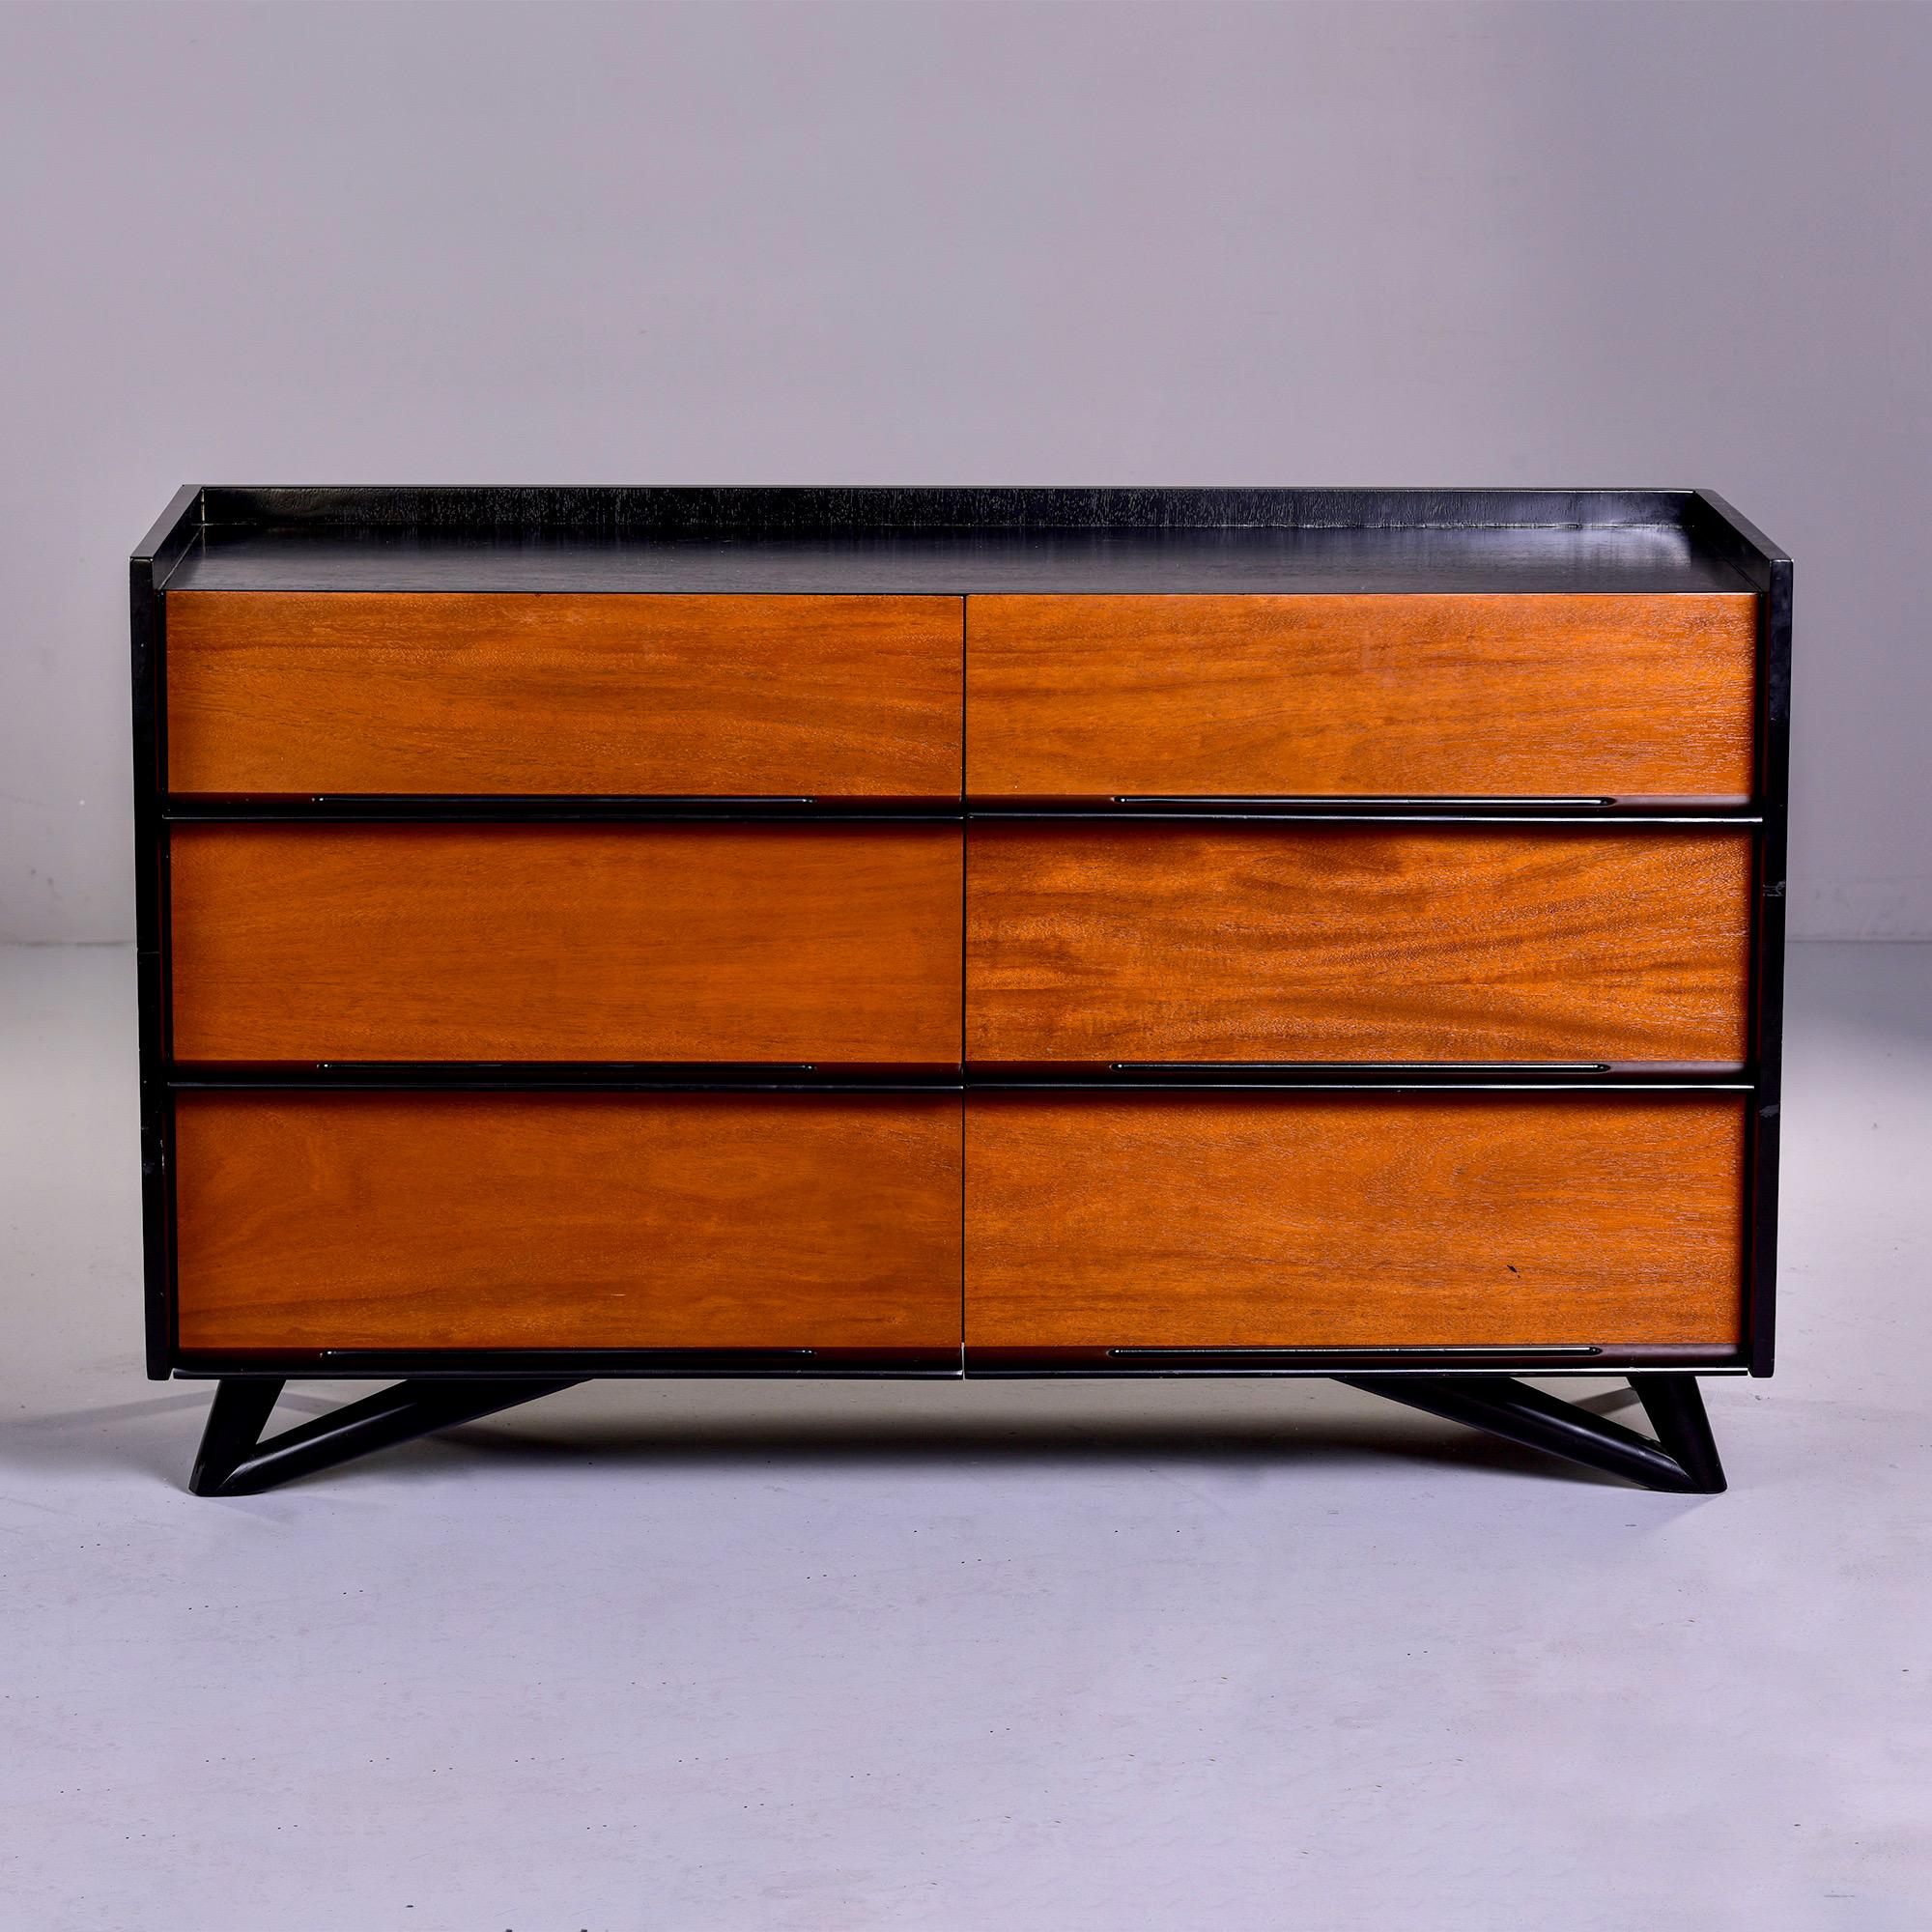 Found in US, this circa 1960s six drawer chest features a black lacquered frame, open work drawer pulls, base, legs and feet while the drawers are in a contrasting wood - probably walnut. Unknown maker - no manufacturer’s marks found but this is a